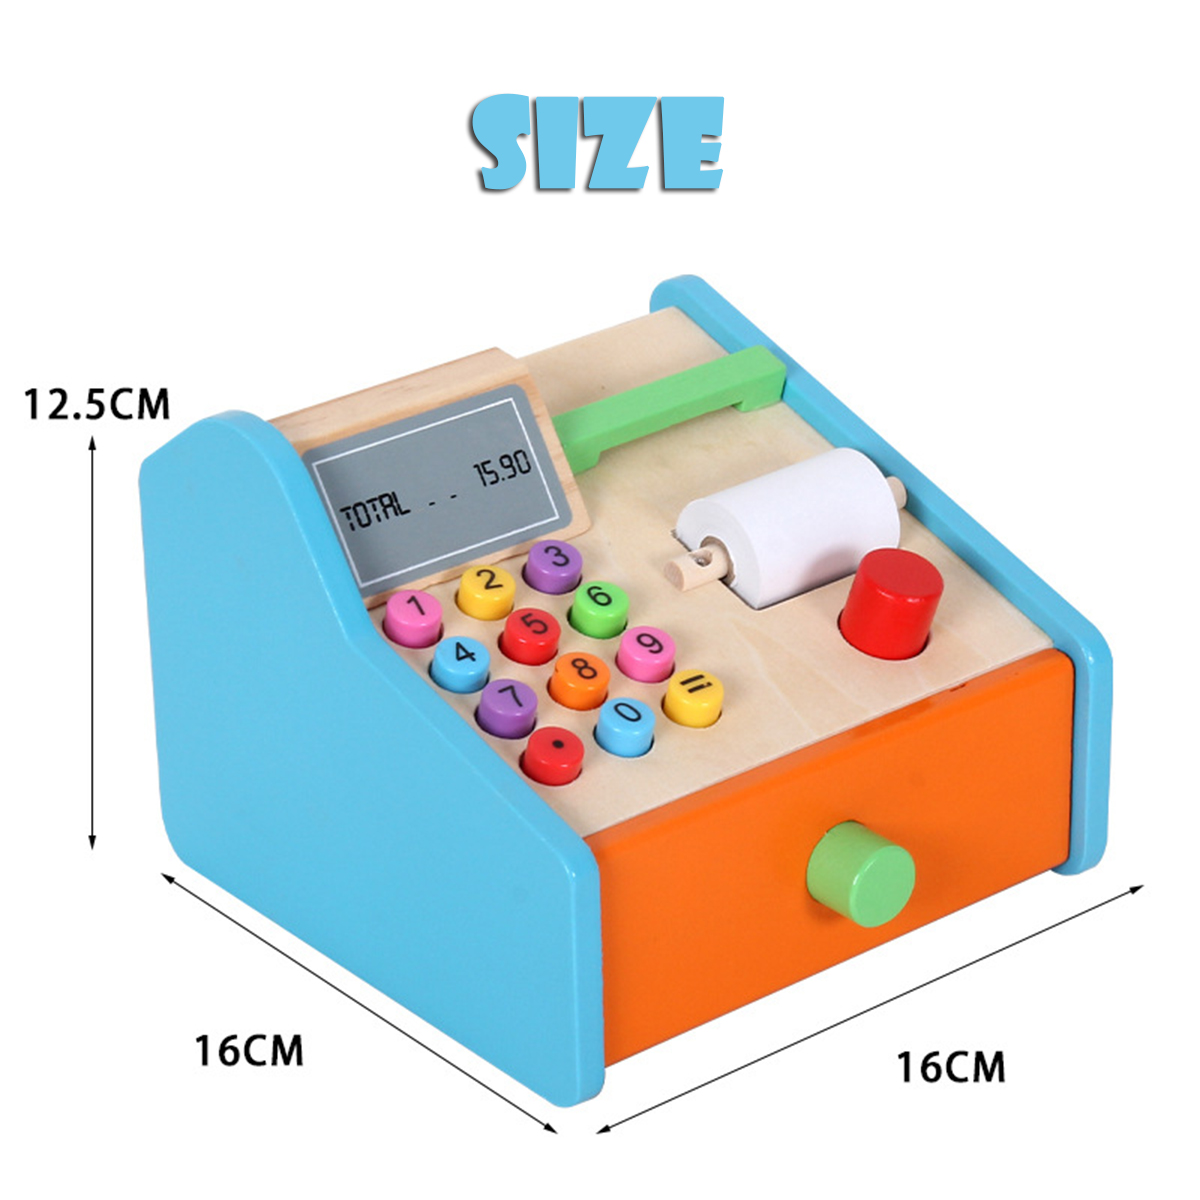 Wooden-Cash-Register-Shop-Grocery-Checkout-Play-Game-Learn-Education-Toys-for-Kids-Perfect-Gift-1685525-6